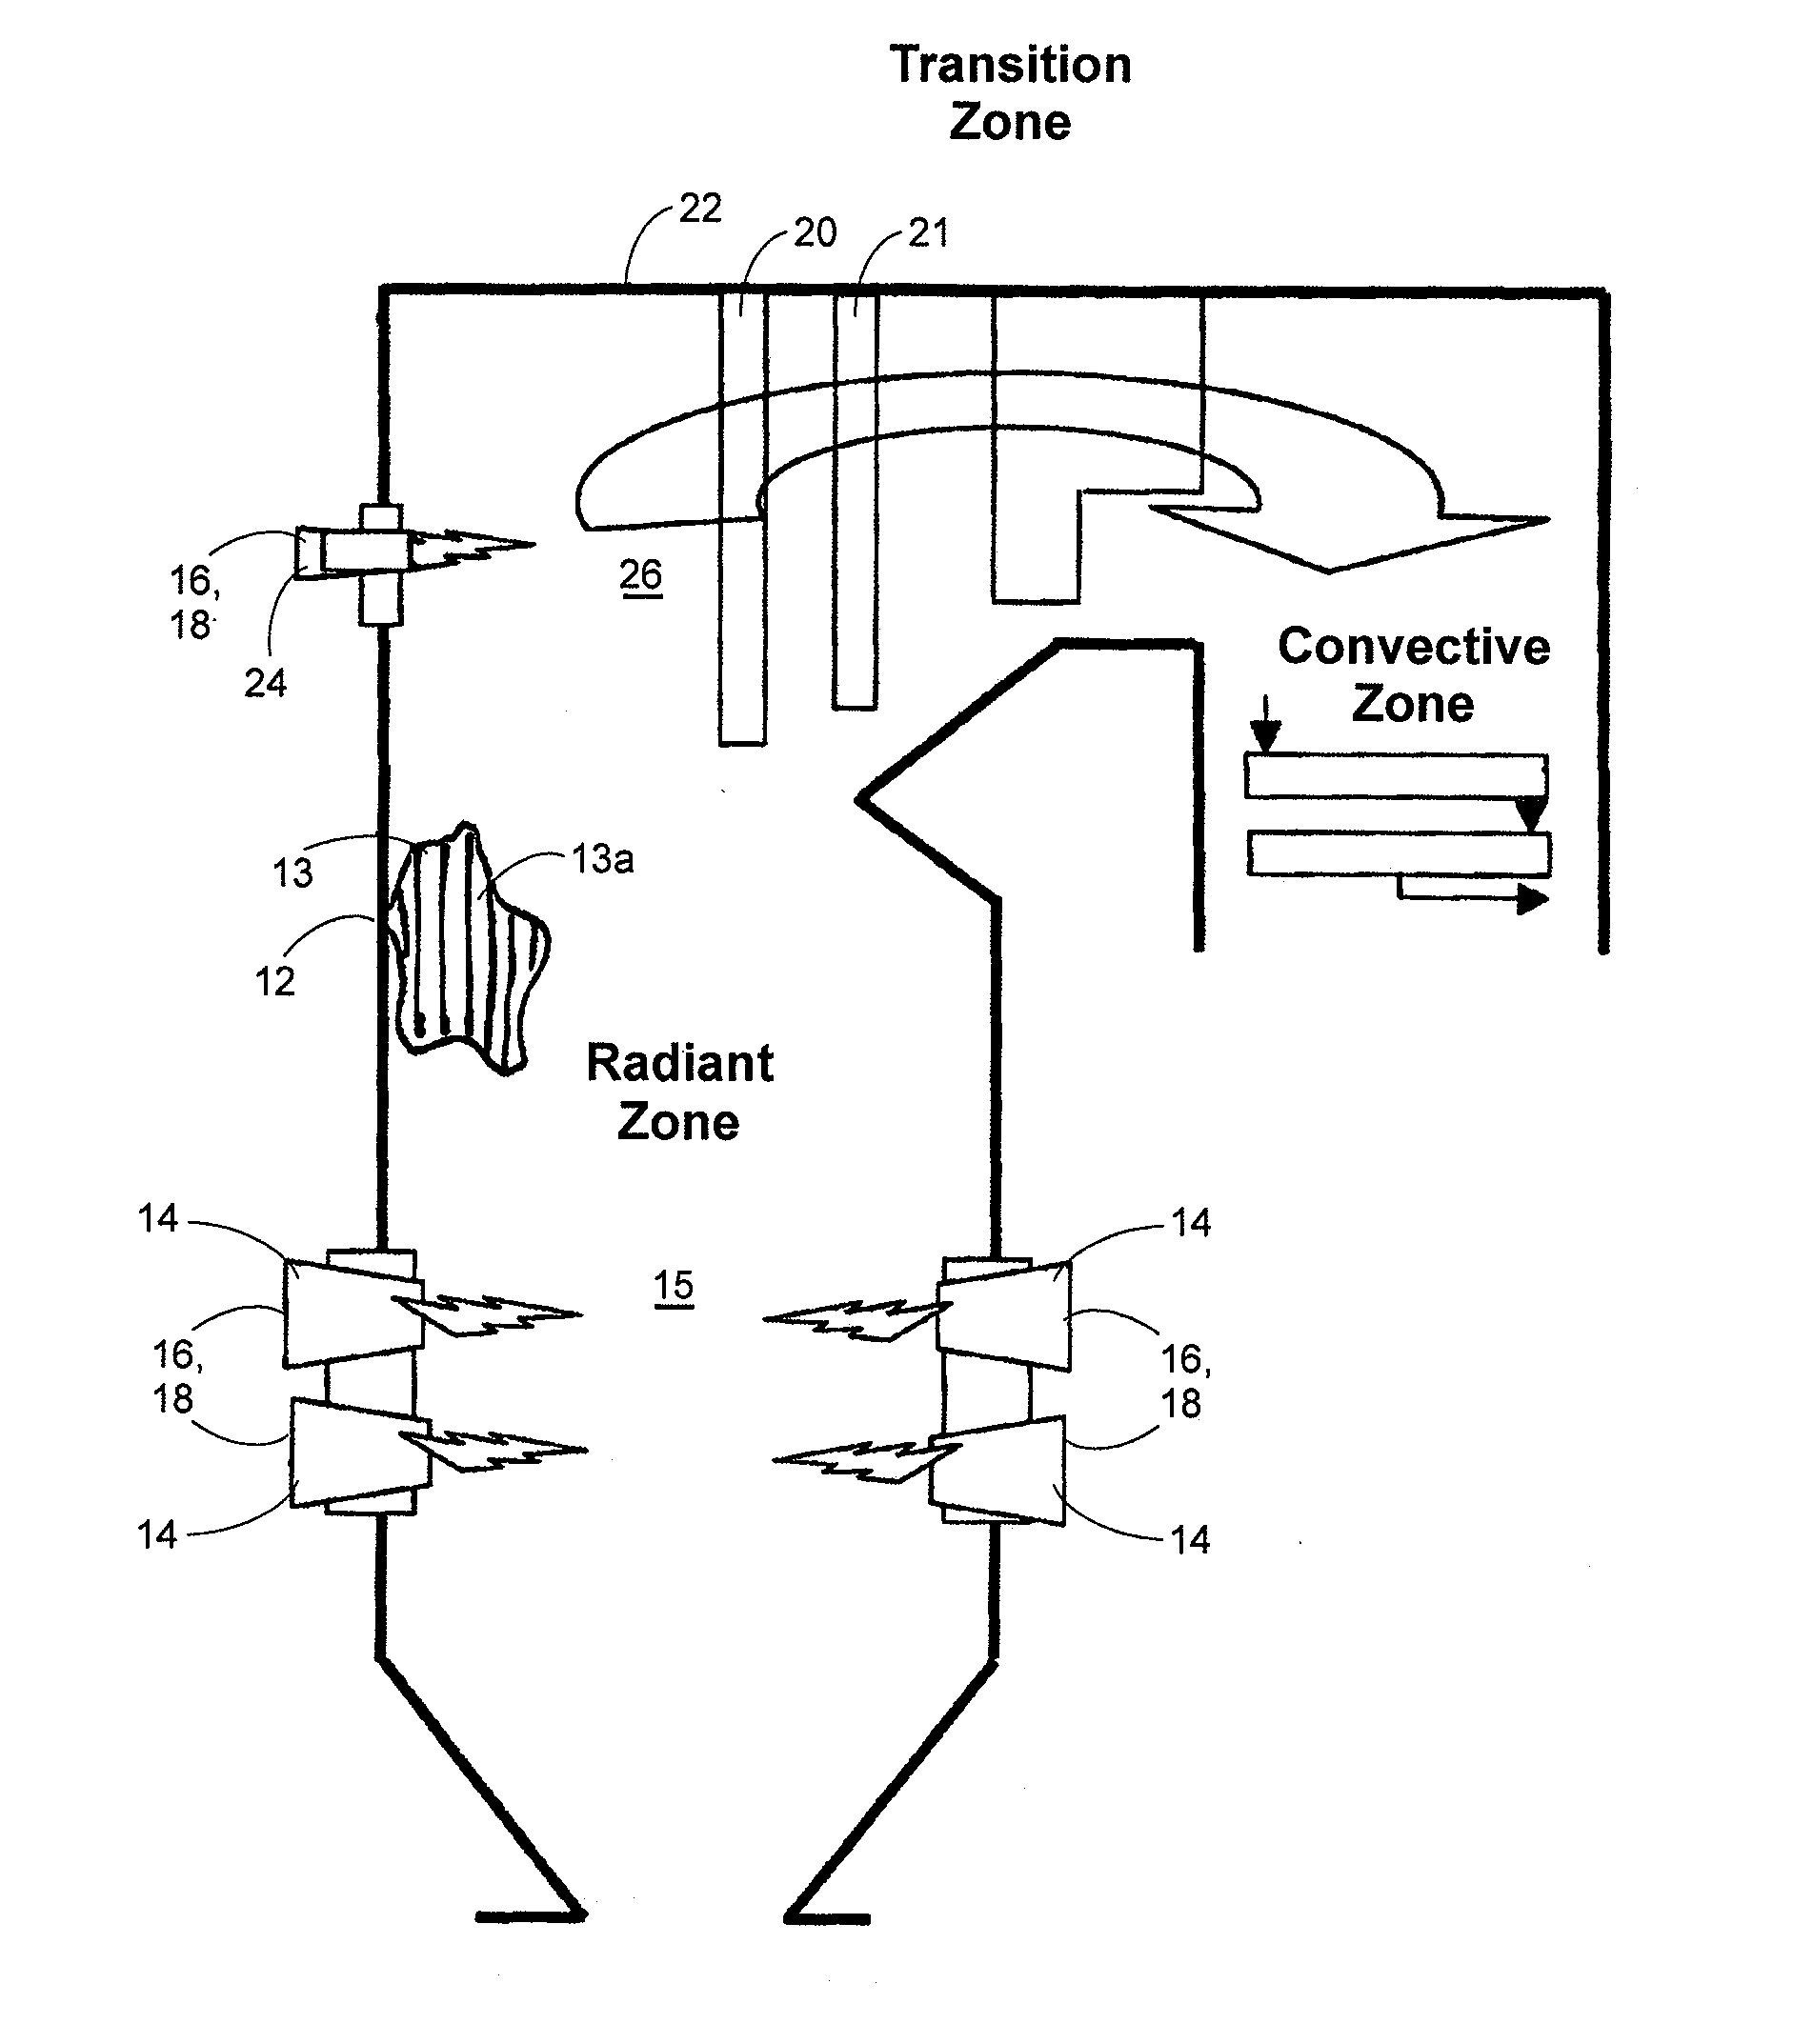 Oxy-fuel combustion system with closed loop flame temperature control